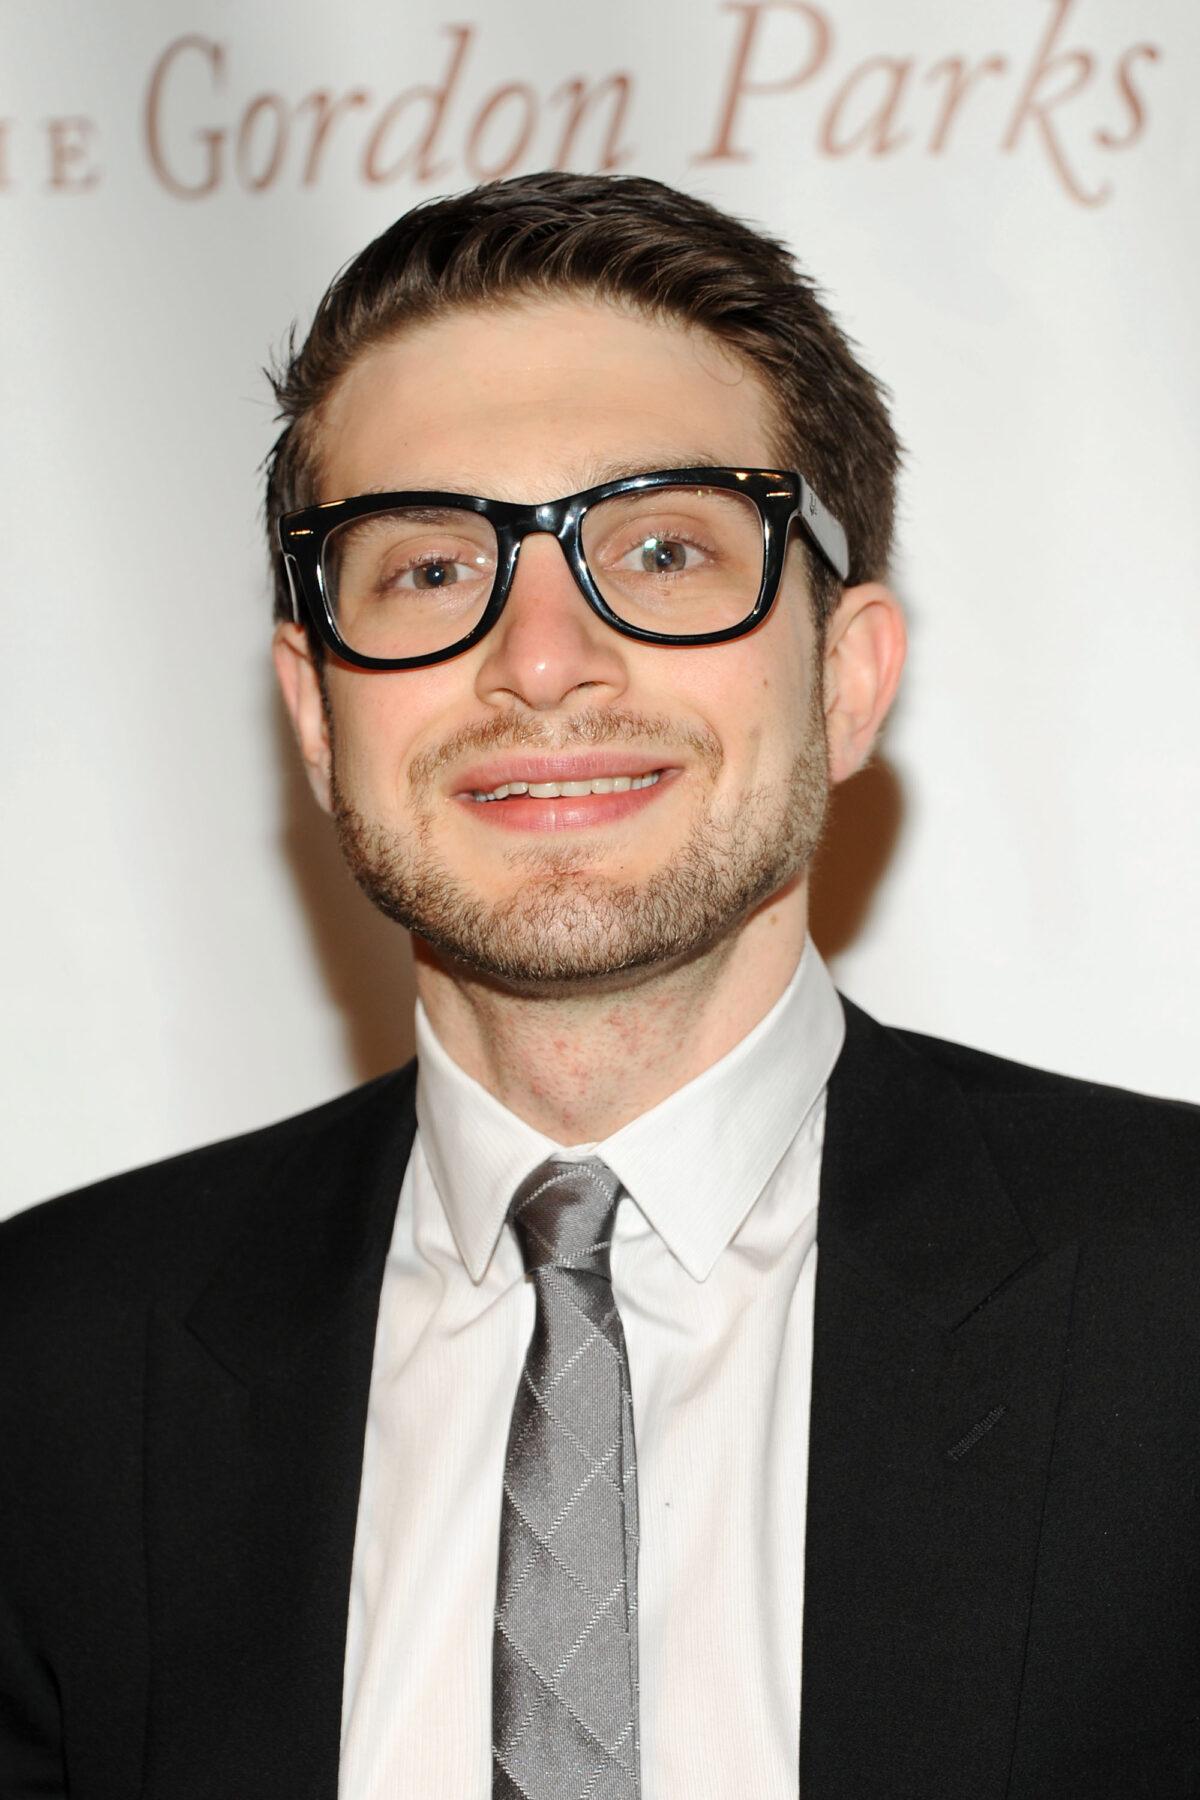 Philanthropist Alex Soros, son of George Soros, attends an event in New York City, on June 4, 2013. (Ben Gabbe/Getty Images)